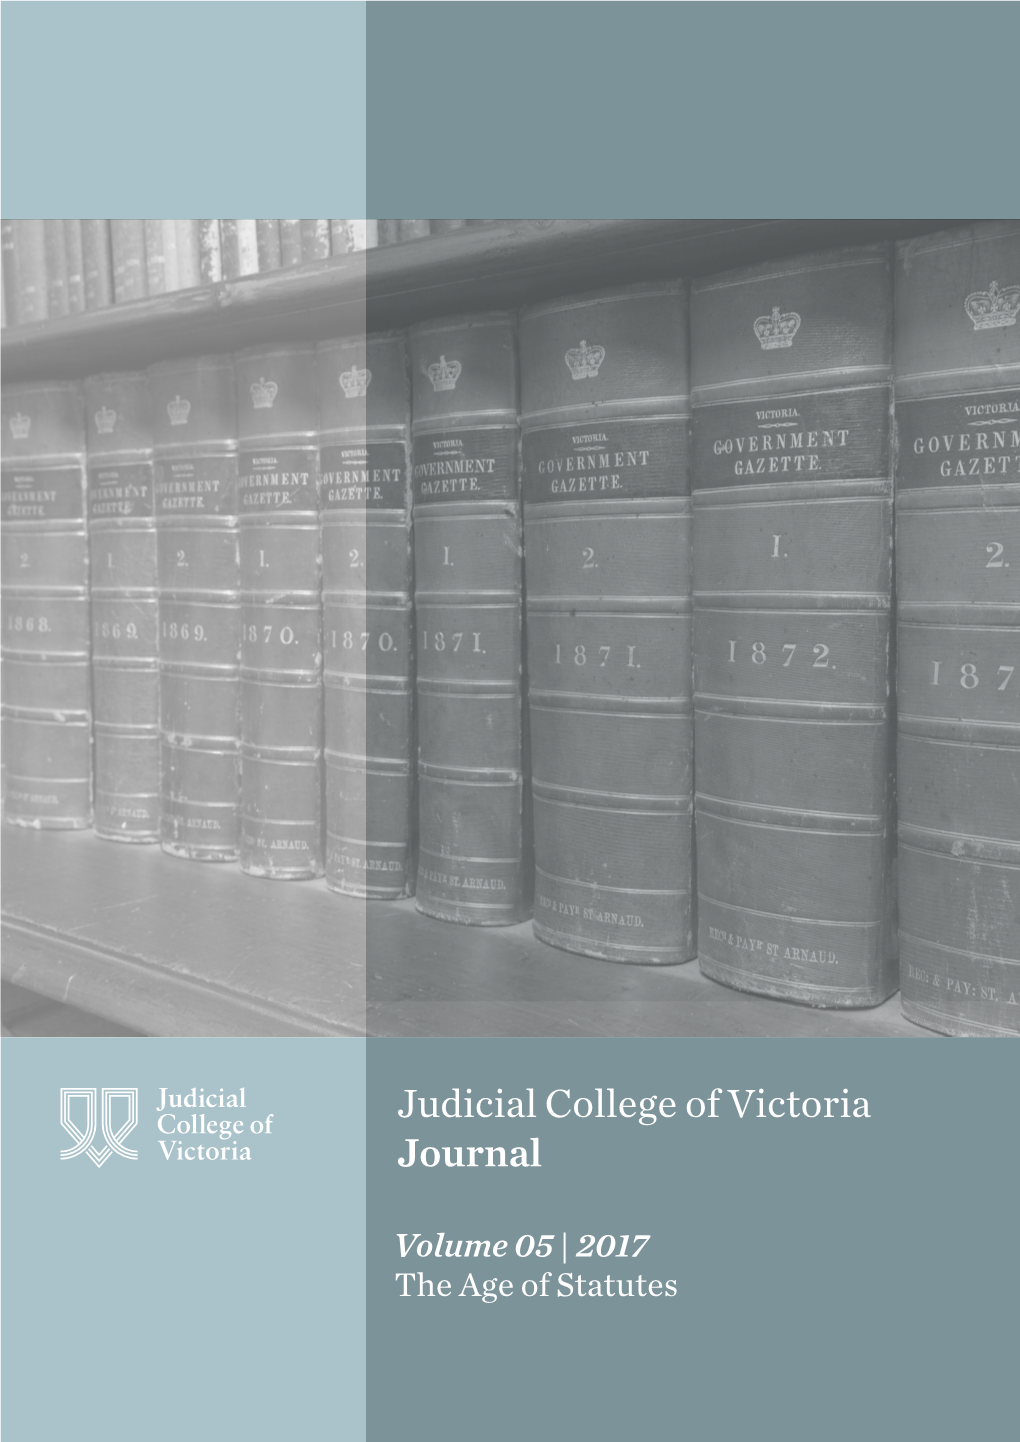 Volume 05 | 2017 the Age of Statutes Judicial College of Victoria Journal Volume 05 | 2017